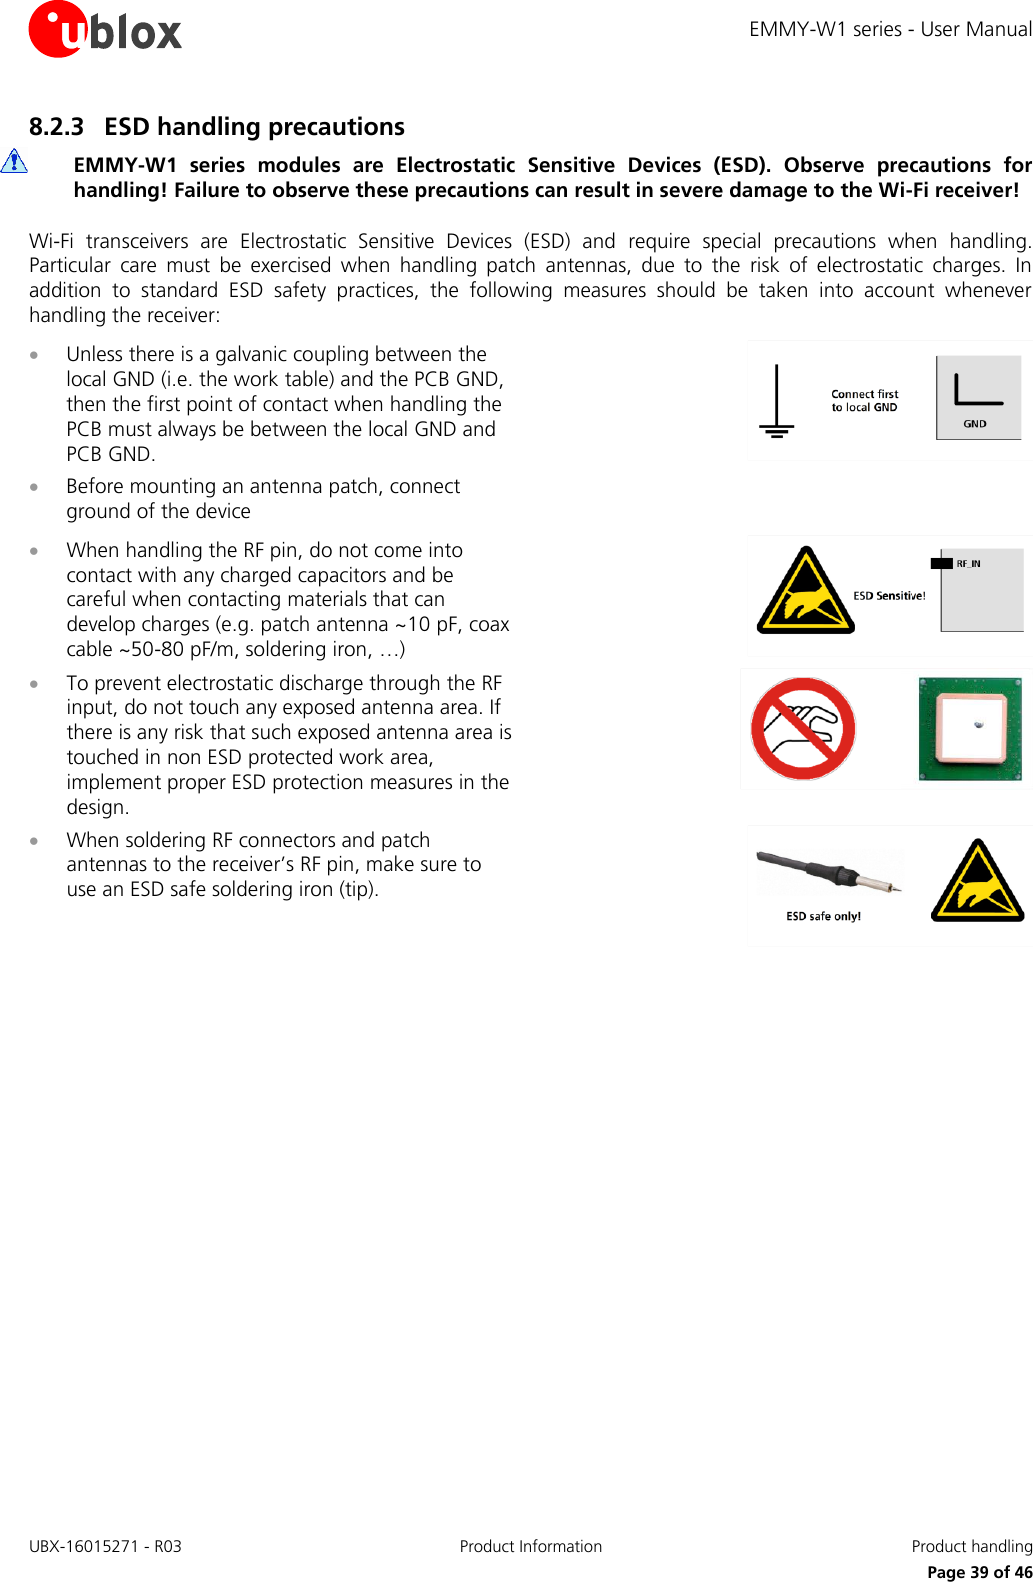 EMMY-W1 series - User Manual UBX-16015271 - R03 Product Information  Product handling     Page 39 of 46 8.2.3 ESD handling precautions  EMMY-W1  series  modules  are  Electrostatic  Sensitive  Devices  (ESD).  Observe  precautions  for handling! Failure to observe these precautions can result in severe damage to the Wi-Fi receiver! Wi-Fi  transceivers  are  Electrostatic  Sensitive  Devices  (ESD)  and  require  special  precautions  when  handling. Particular  care  must  be  exercised  when  handling  patch  antennas,  due  to  the  risk  of  electrostatic  charges.  In addition  to  standard  ESD  safety  practices,  the  following  measures  should  be  taken  into  account  whenever handling the receiver:  Unless there is a galvanic coupling between the local GND (i.e. the work table) and the PCB GND, then the first point of contact when handling the PCB must always be between the local GND and PCB GND.  Before mounting an antenna patch, connect ground of the device   When handling the RF pin, do not come into contact with any charged capacitors and be careful when contacting materials that can develop charges (e.g. patch antenna ~10 pF, coax cable ~50-80 pF/m, soldering iron, …)   To prevent electrostatic discharge through the RF input, do not touch any exposed antenna area. If there is any risk that such exposed antenna area is touched in non ESD protected work area, implement proper ESD protection measures in the design.   When soldering RF connectors and patch antennas to the receiver’s RF pin, make sure to use an ESD safe soldering iron (tip).     